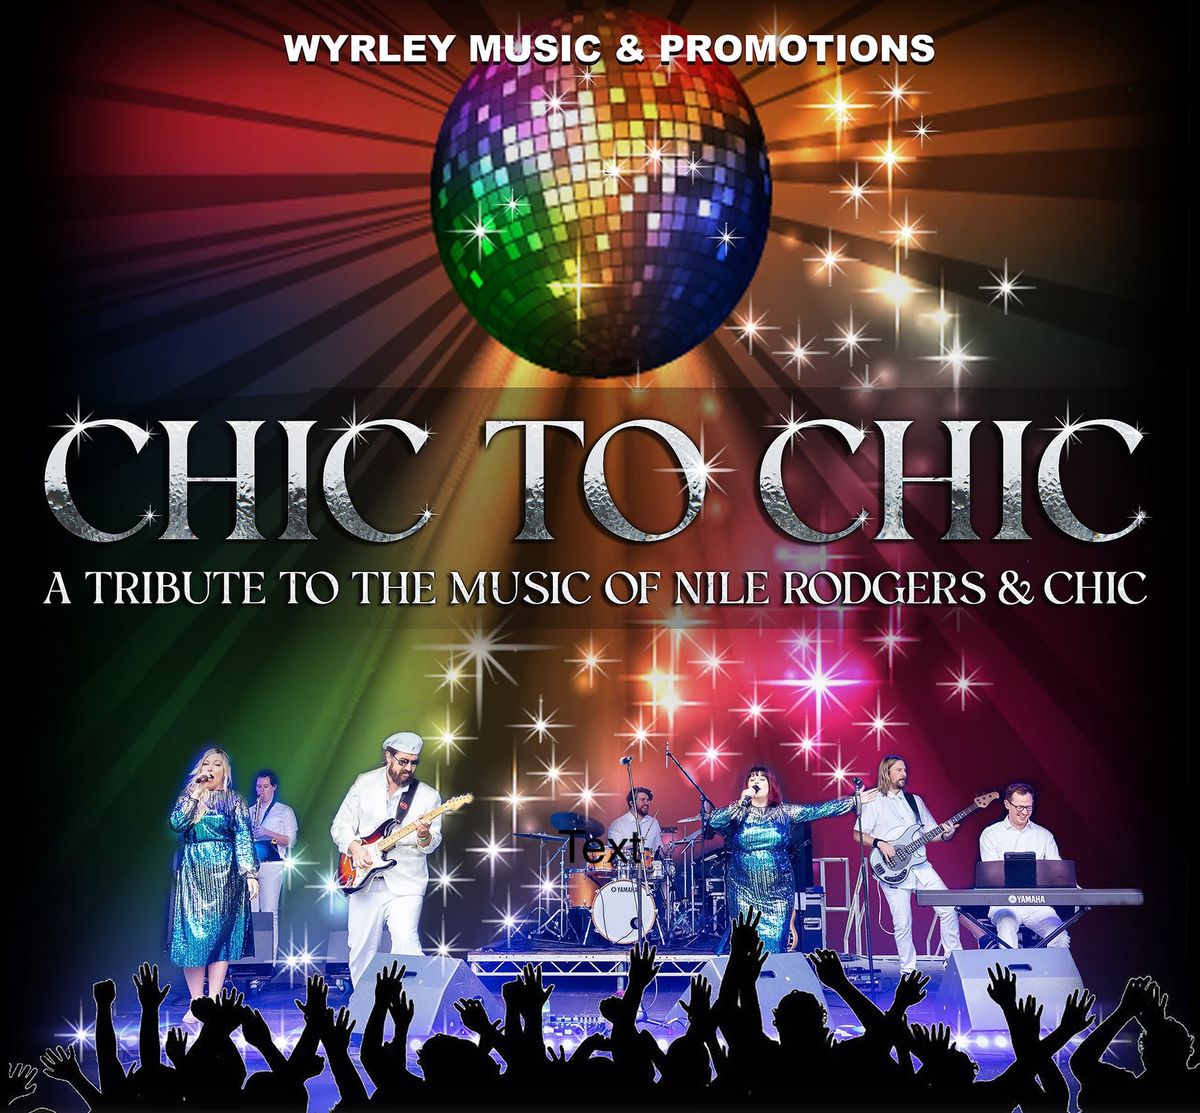 Chic to Chic Live at The Joseph Rowntree Theatre, York